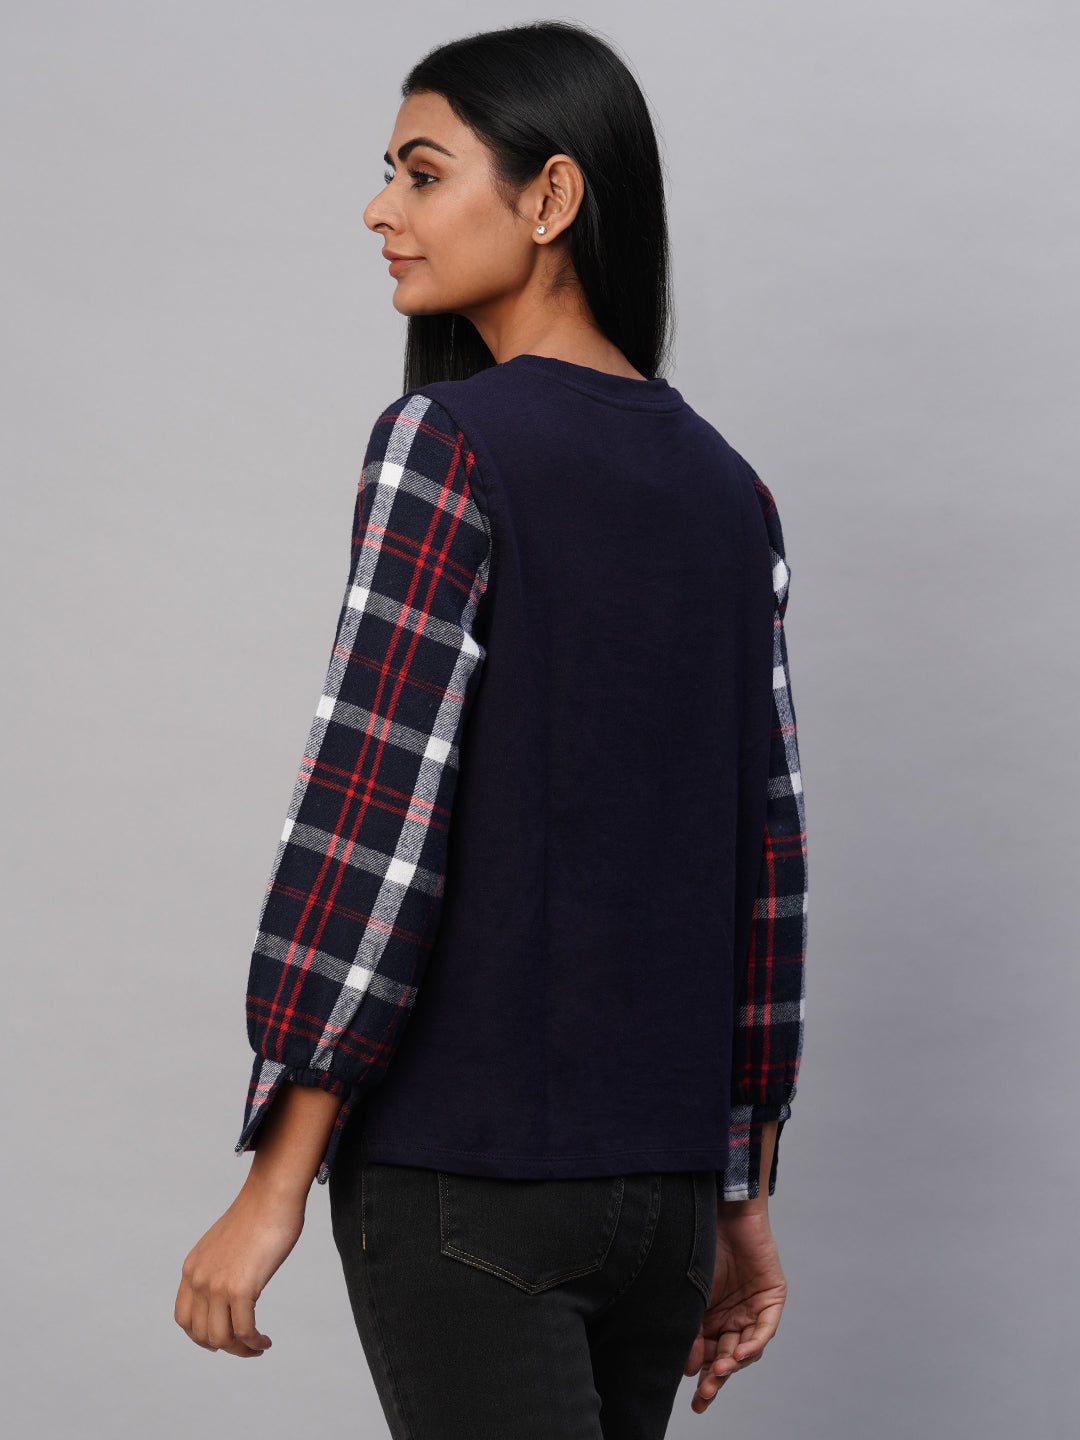 French Terry Sweatshirt With Brushed Plaid Cuffed Sleeves